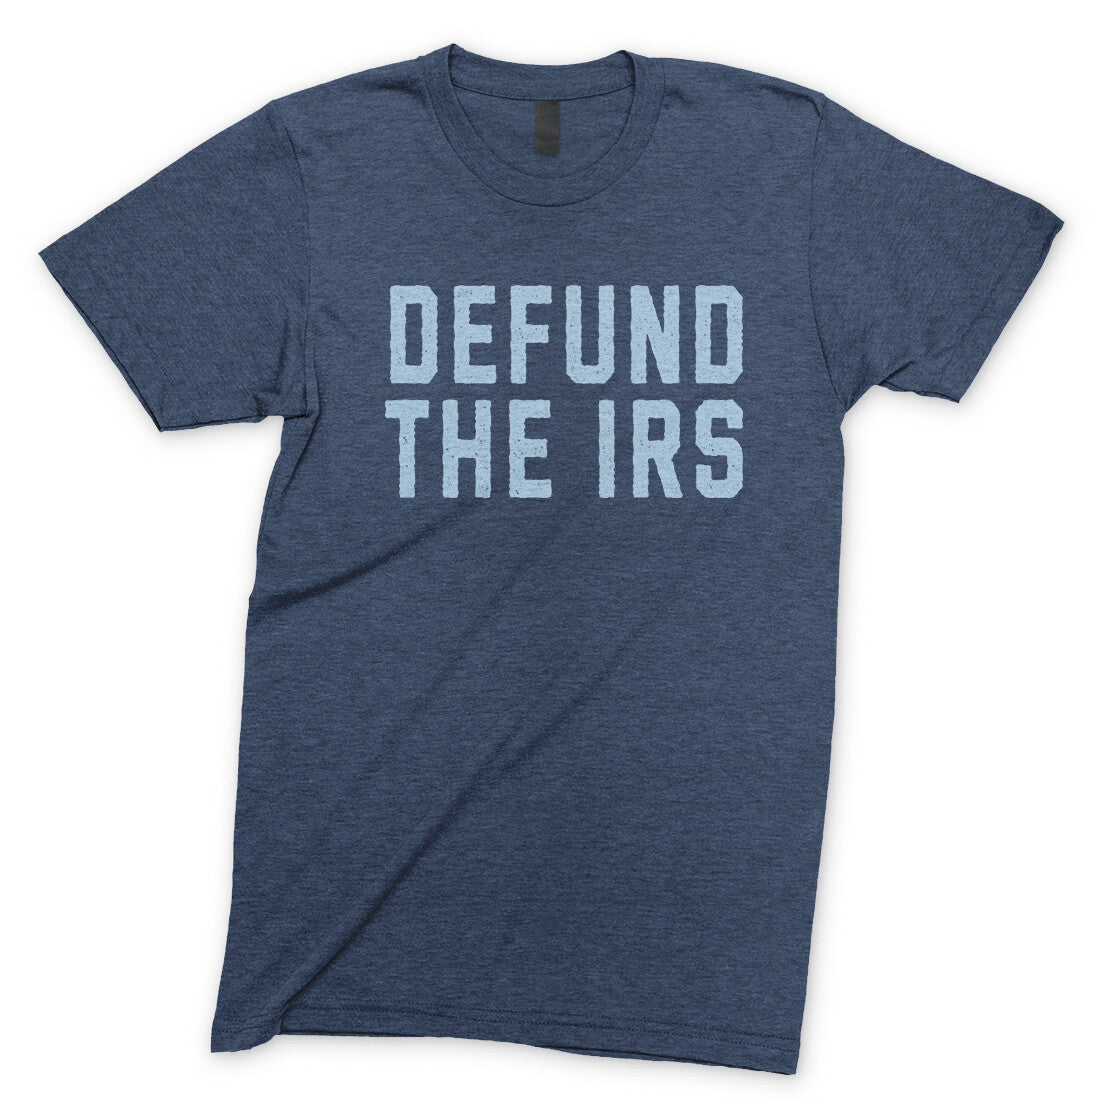 Defund the IRS in Navy Heather Color